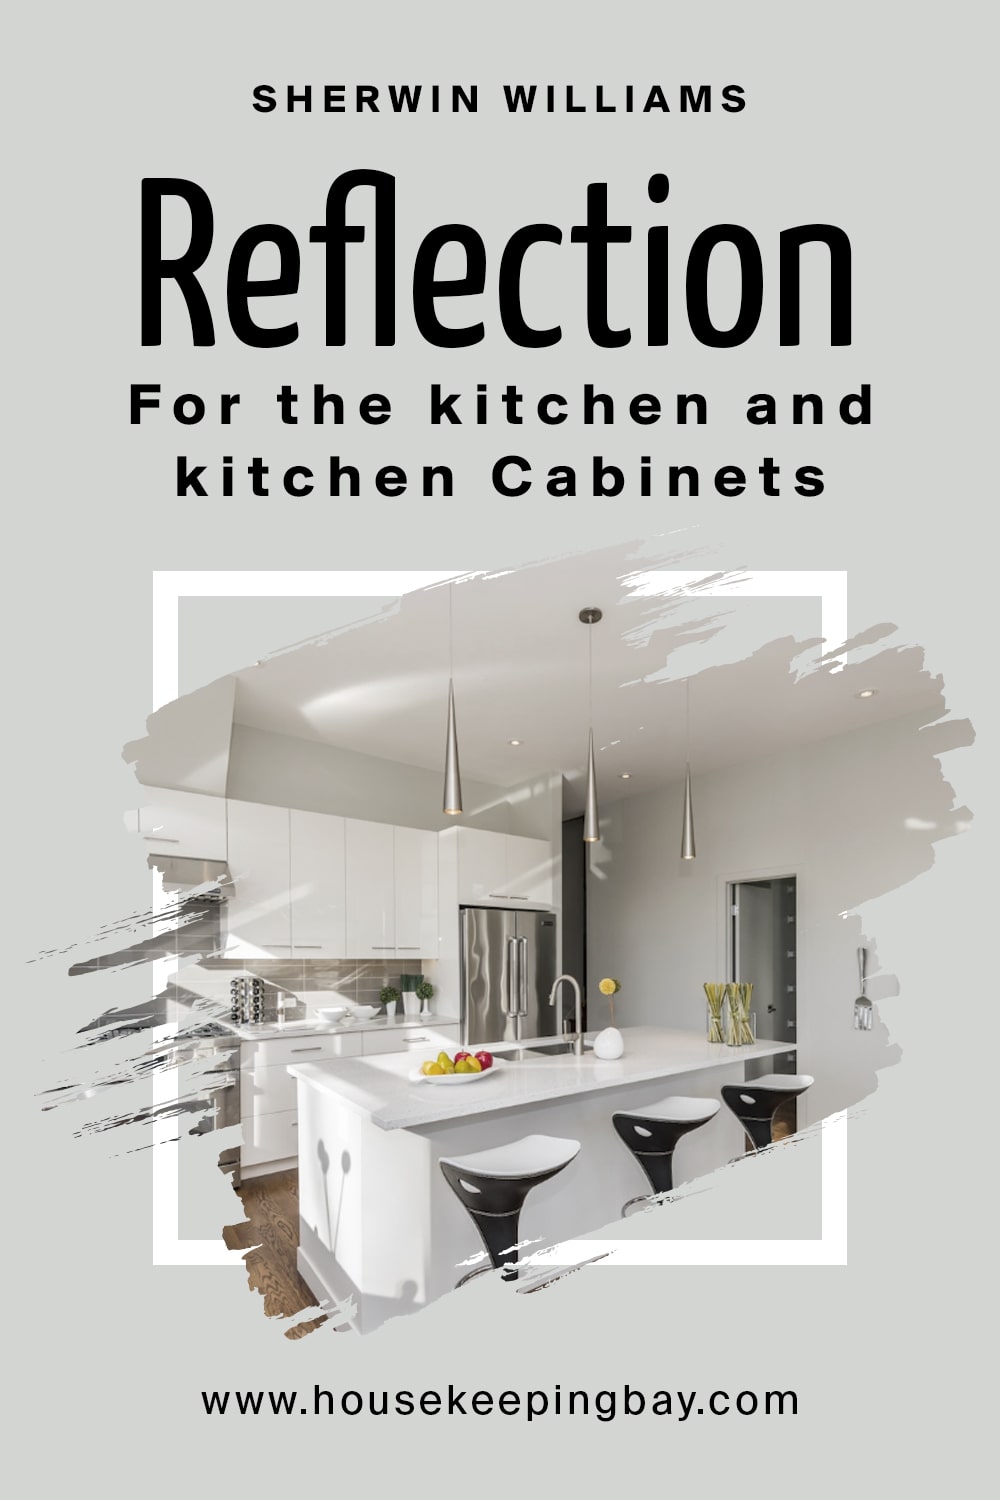 Sherwin Williams. Reflection For the kitchen and kitchen Cabinets